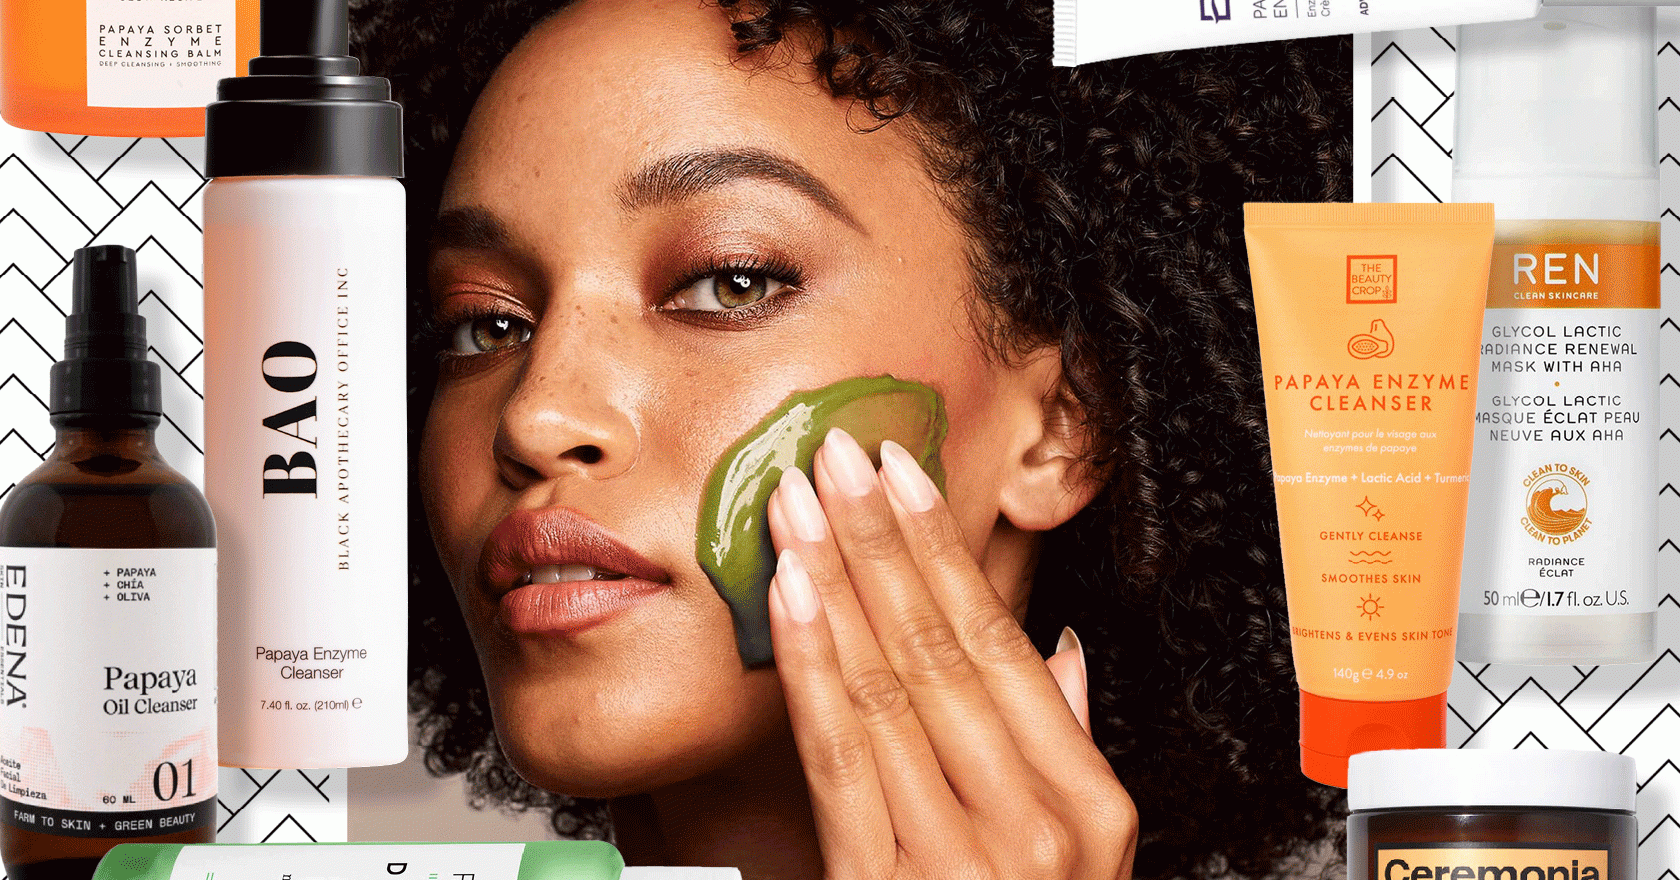 Papaya-based skincare promises a glowier, brighter-looking complexion: here are 11 of the best products to shop